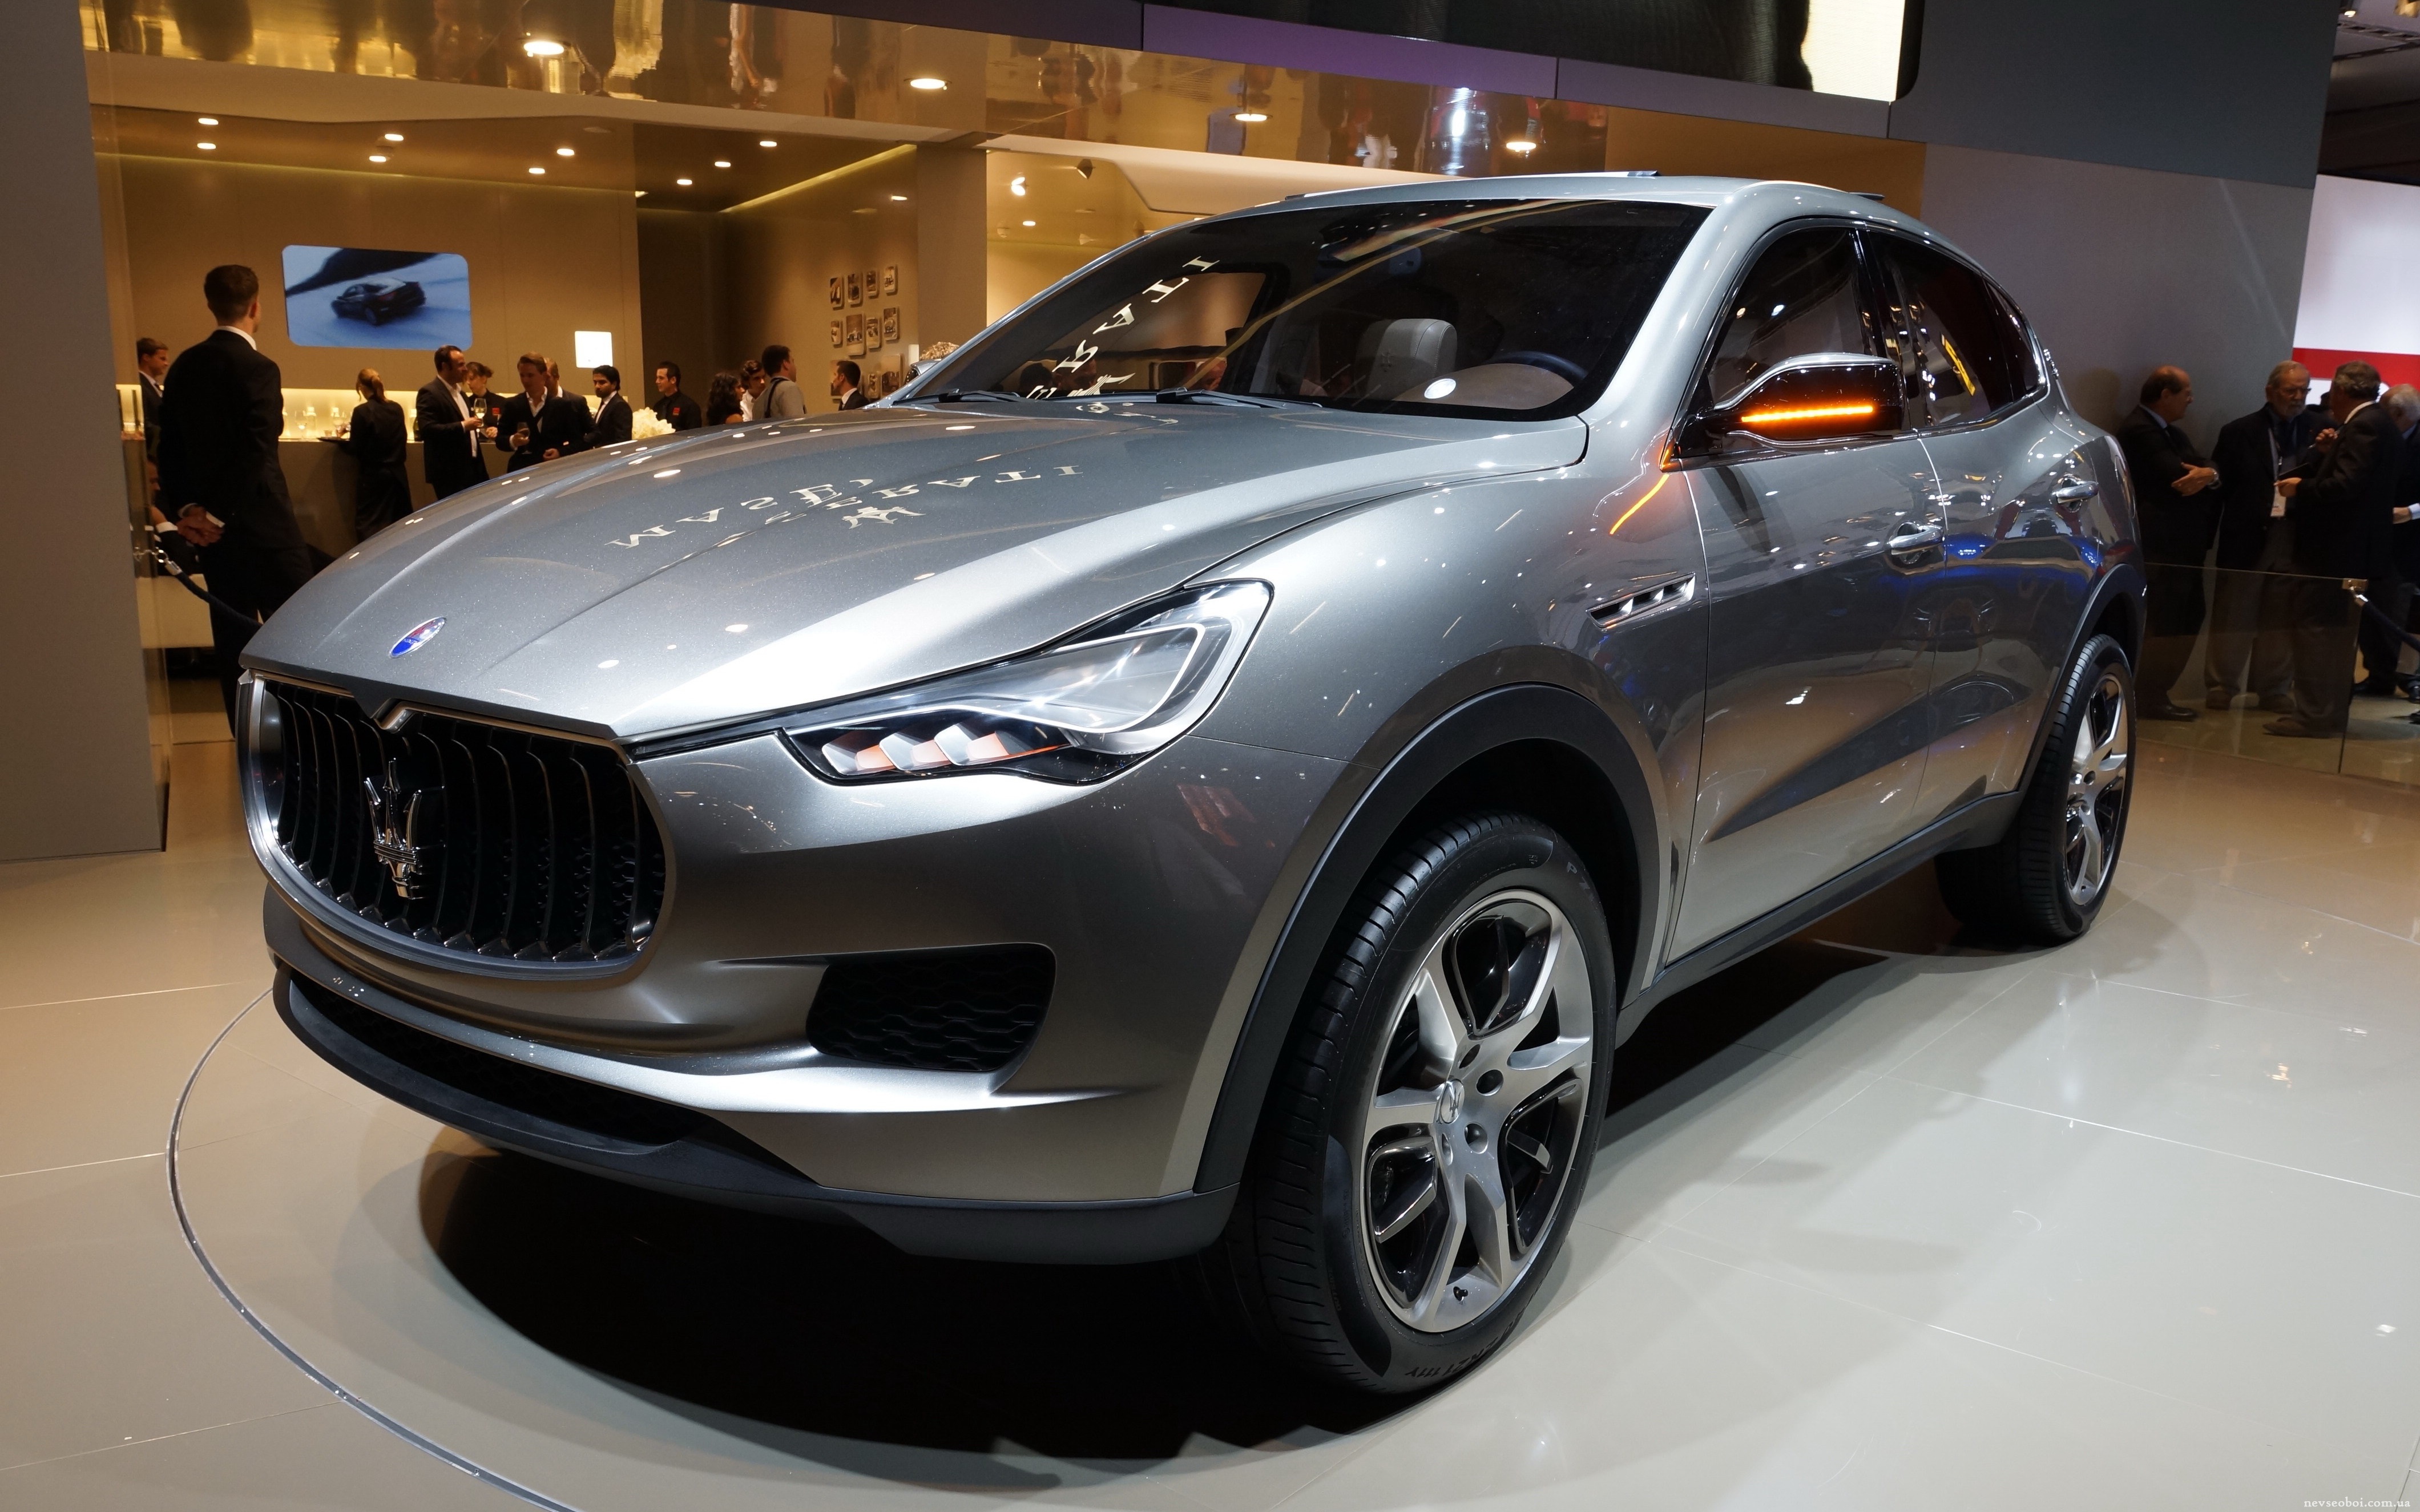 Maserati Levante SUV  Wallpapers Images  Photos Pictures 